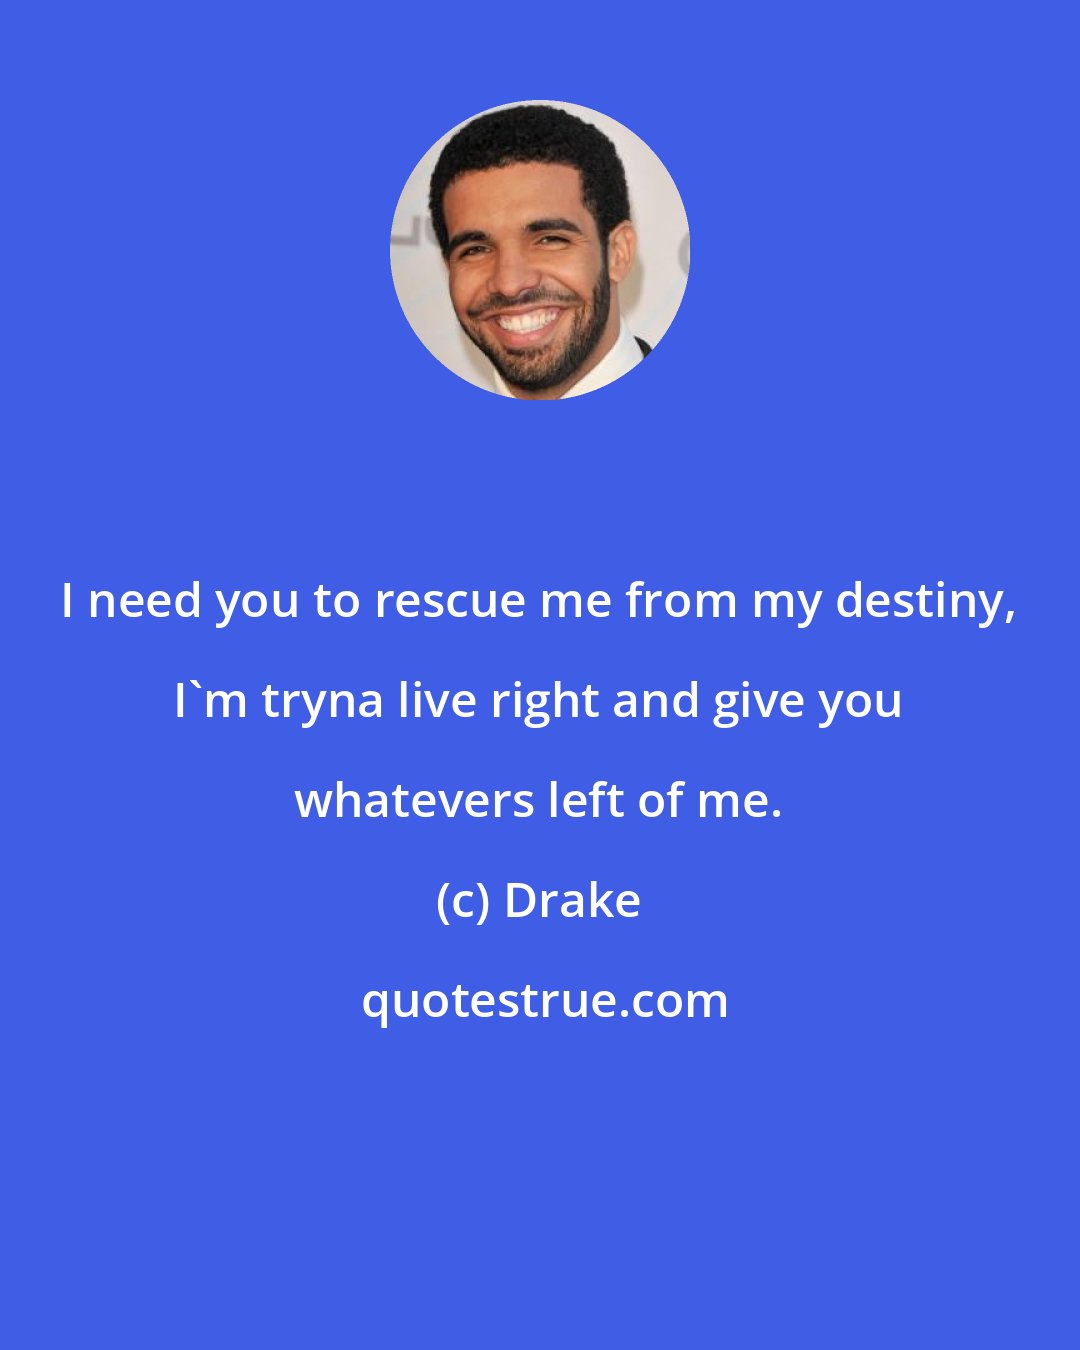 Drake: I need you to rescue me from my destiny, I'm tryna live right and give you whatevers left of me.